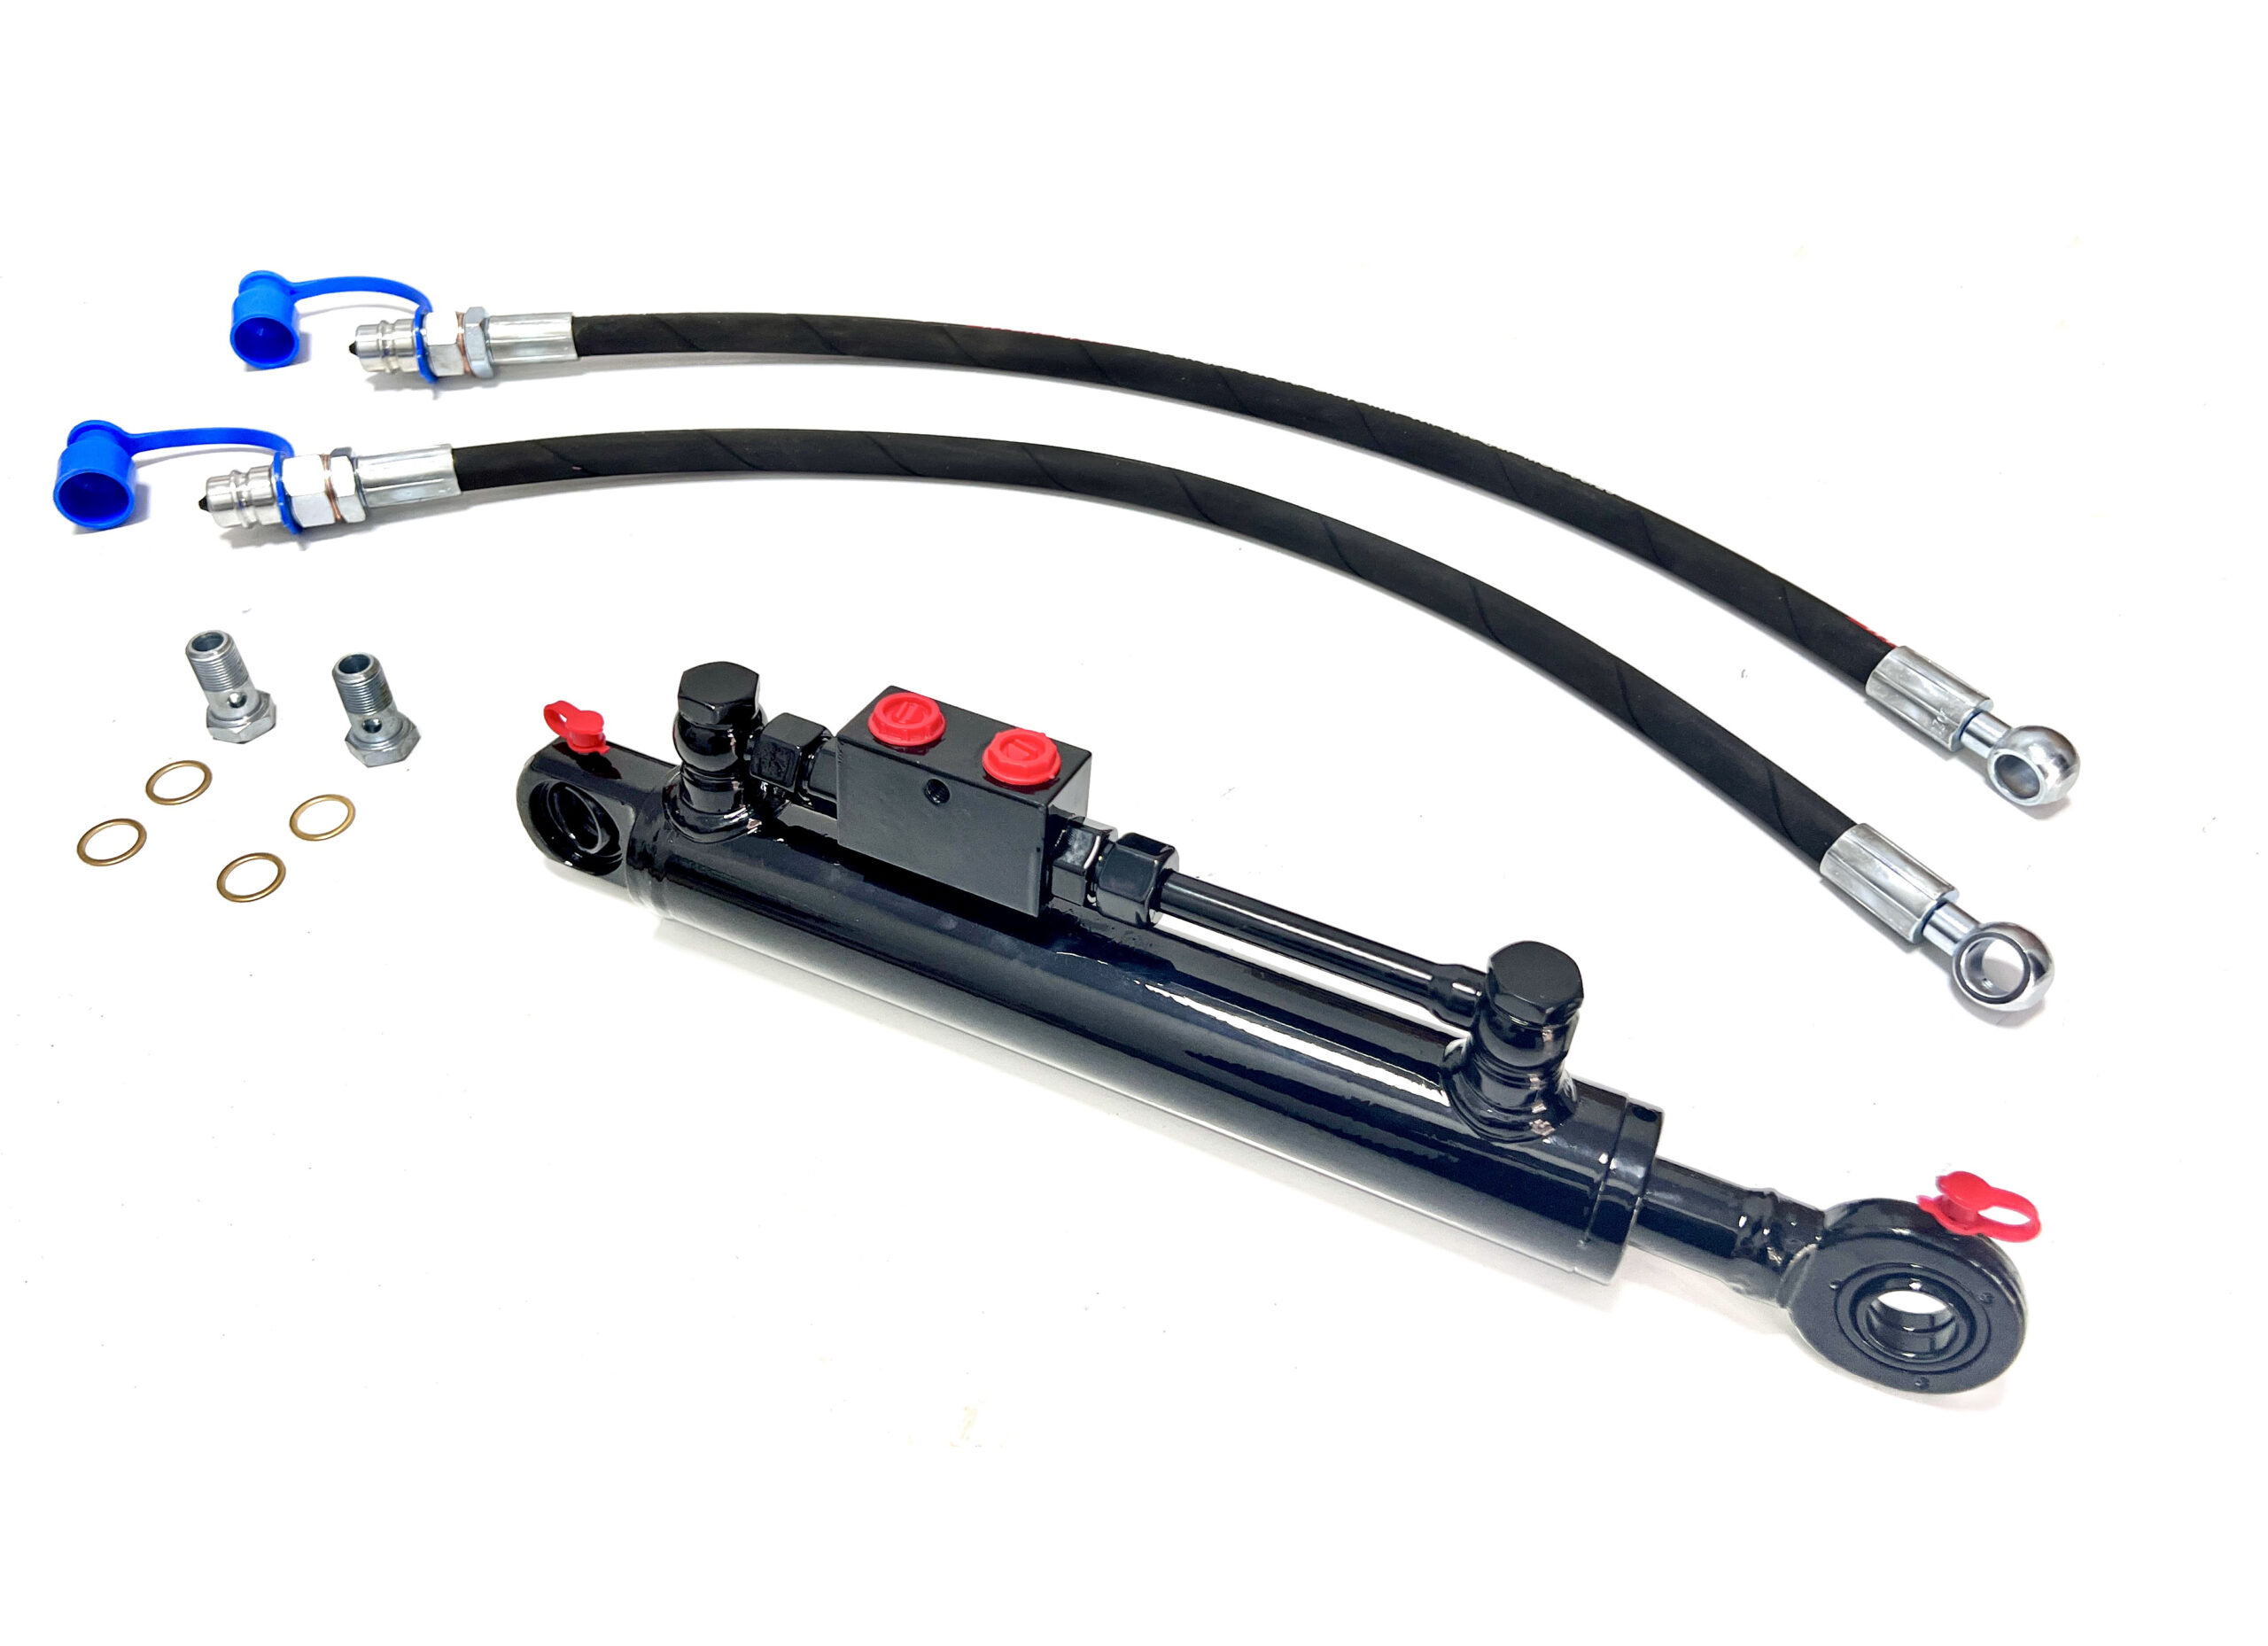 Hydraulic Top Link Cat. 1-1 (20″- 32″) with Locking Block Including 2 Hoses